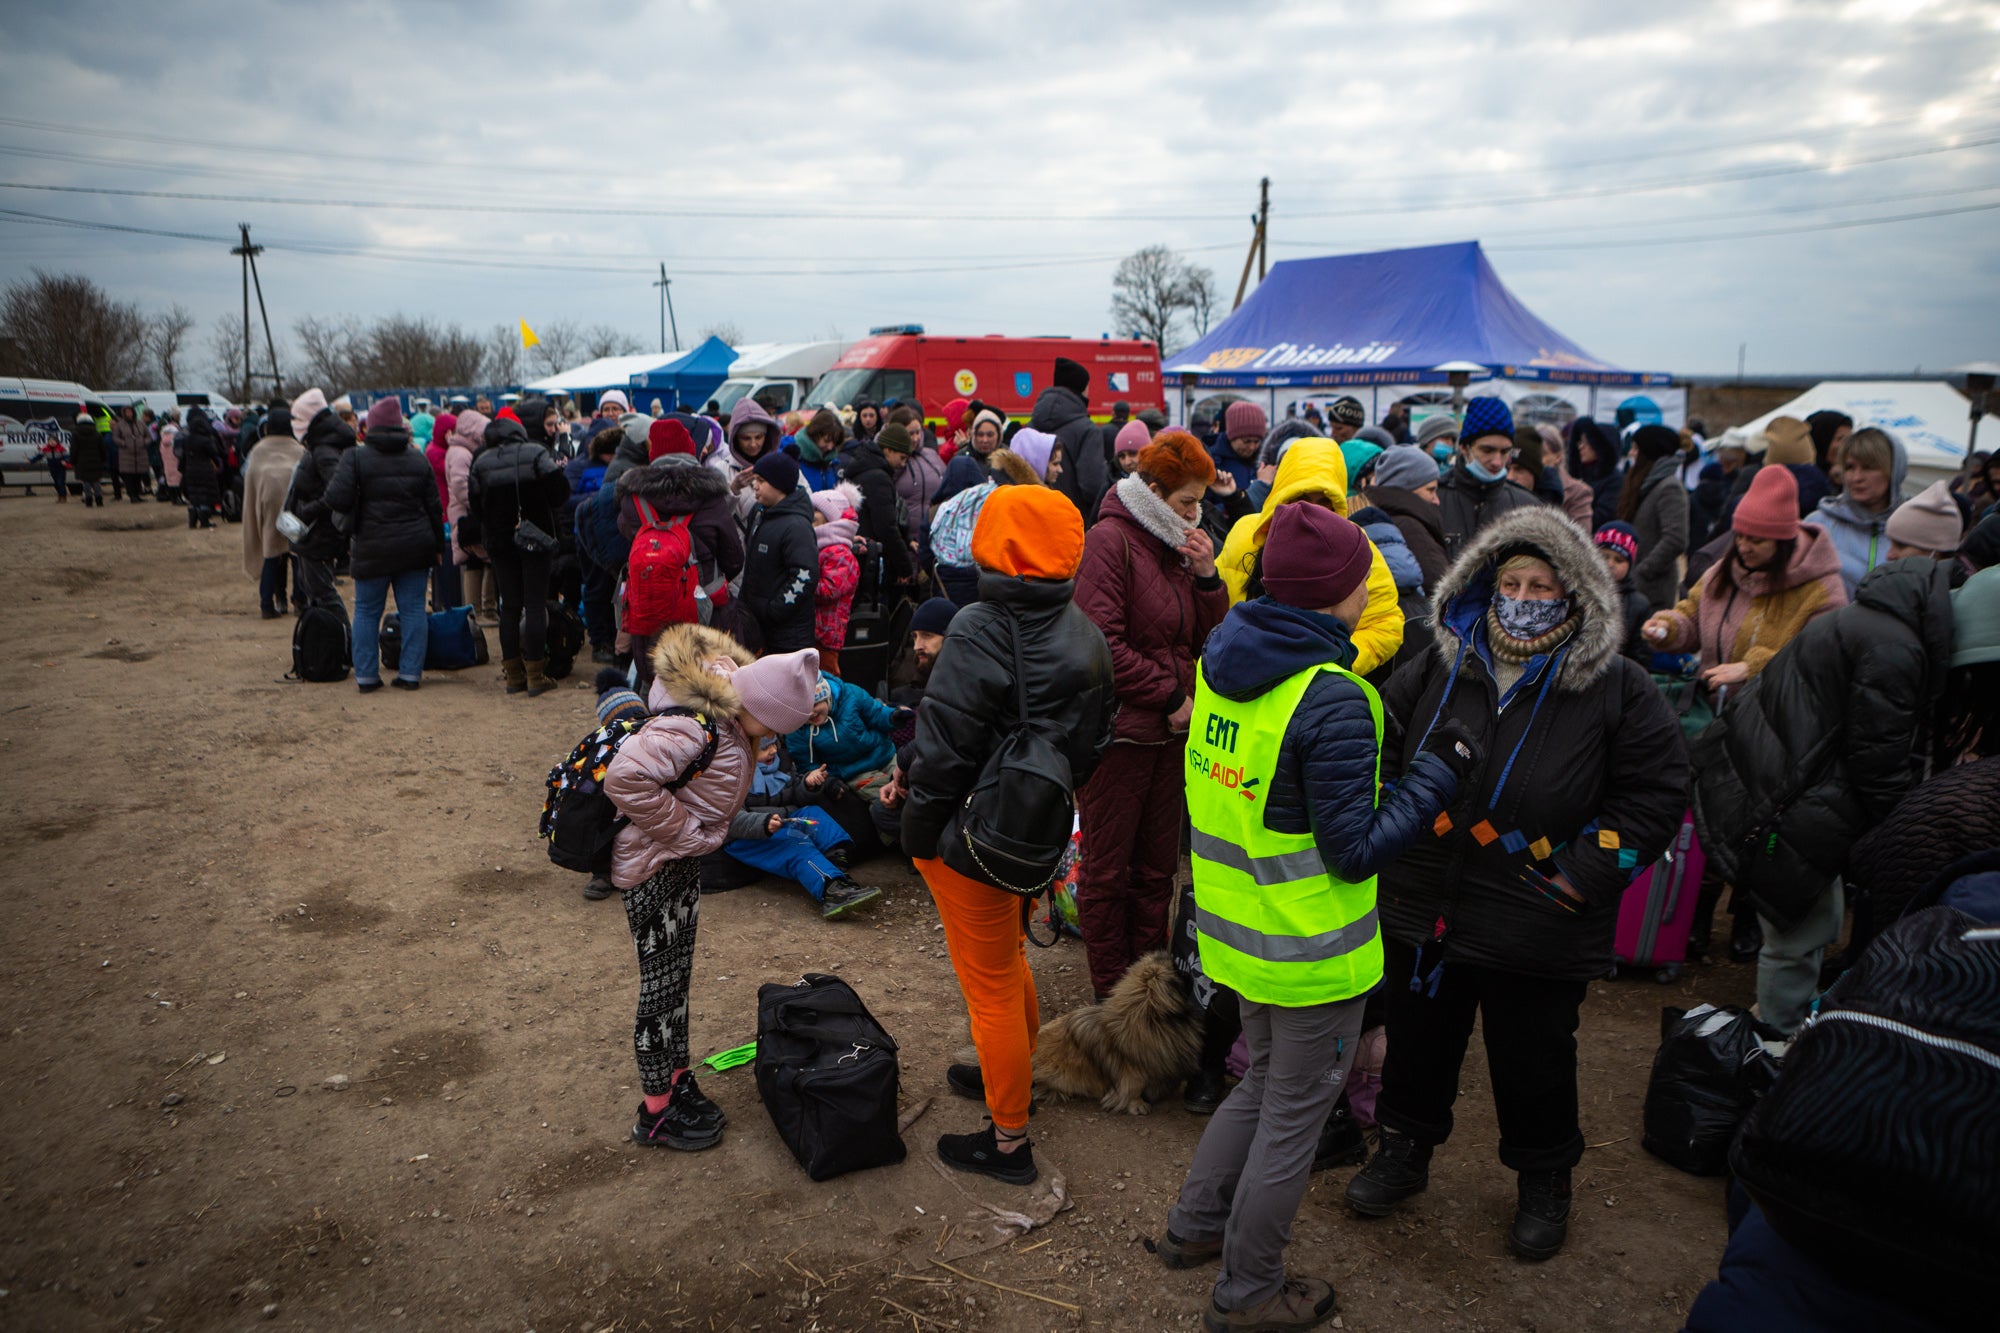 ‘Many waited anxiously for news of relatives, friends, or distant acquaintances, still in line on the other side. Many held their children – or their pets – under blankets, shivering, trying to get warm’